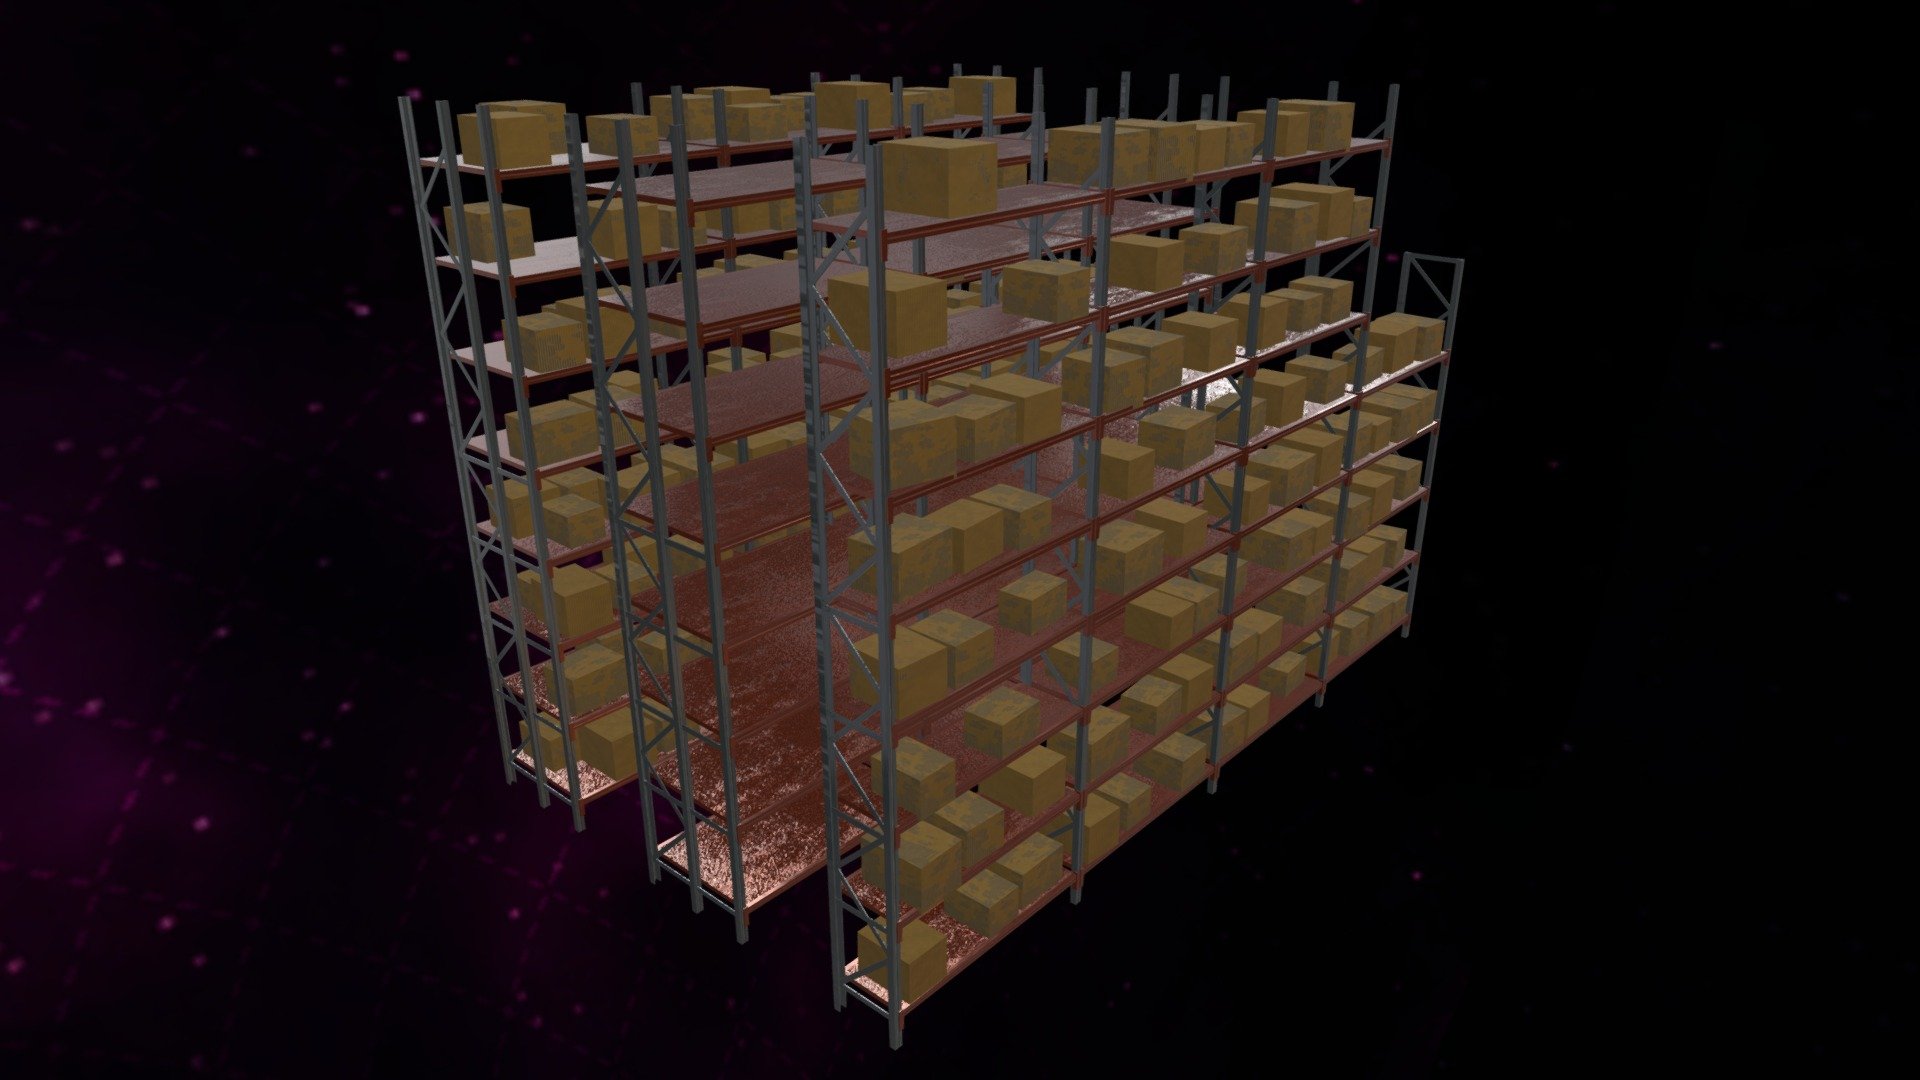 Introducing the Warehouse Storage Racking made by ACBRadio, the programs used to make this object are as follows: Blender 2.92.0, &amp; G.I.M.P 2.10.4…The ‘Textures’ inclued in this object are the following: Normal, Diffuse, Roughness, Metal, Displasment…Textures are obtained from https://cc0textures.com/list?sort=Popular …free of Charge

360 backdrop’s total poly count: Triangles: 4k Vertices: 2k 

Warehouse Storage Racking: Triangles: 23.4k Vertices: 13.8

:D - Warehouse Storage Racking FBX Low Poly FREE - Download Free 3D model by LordSamueliSolo (@LadyLionStudios) 3d model